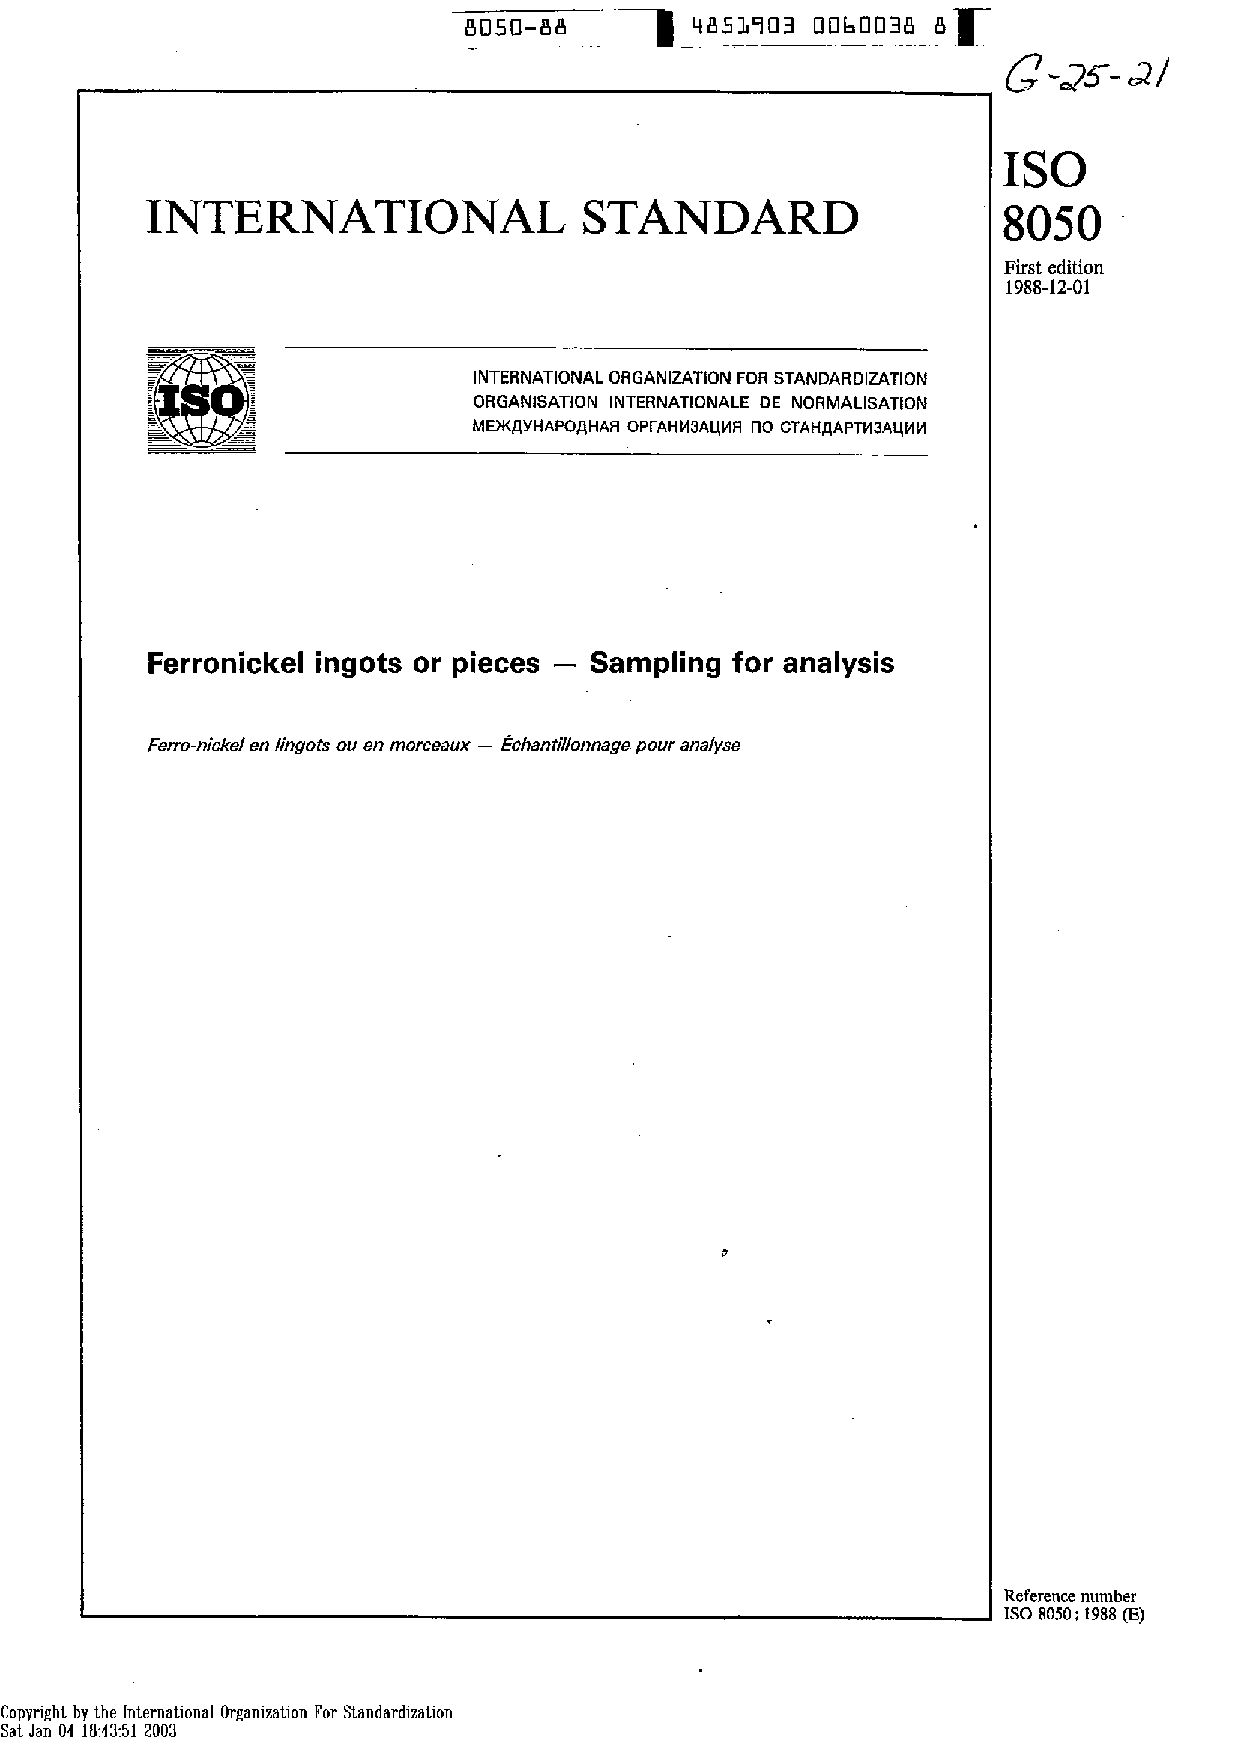 ISO 8050:1988